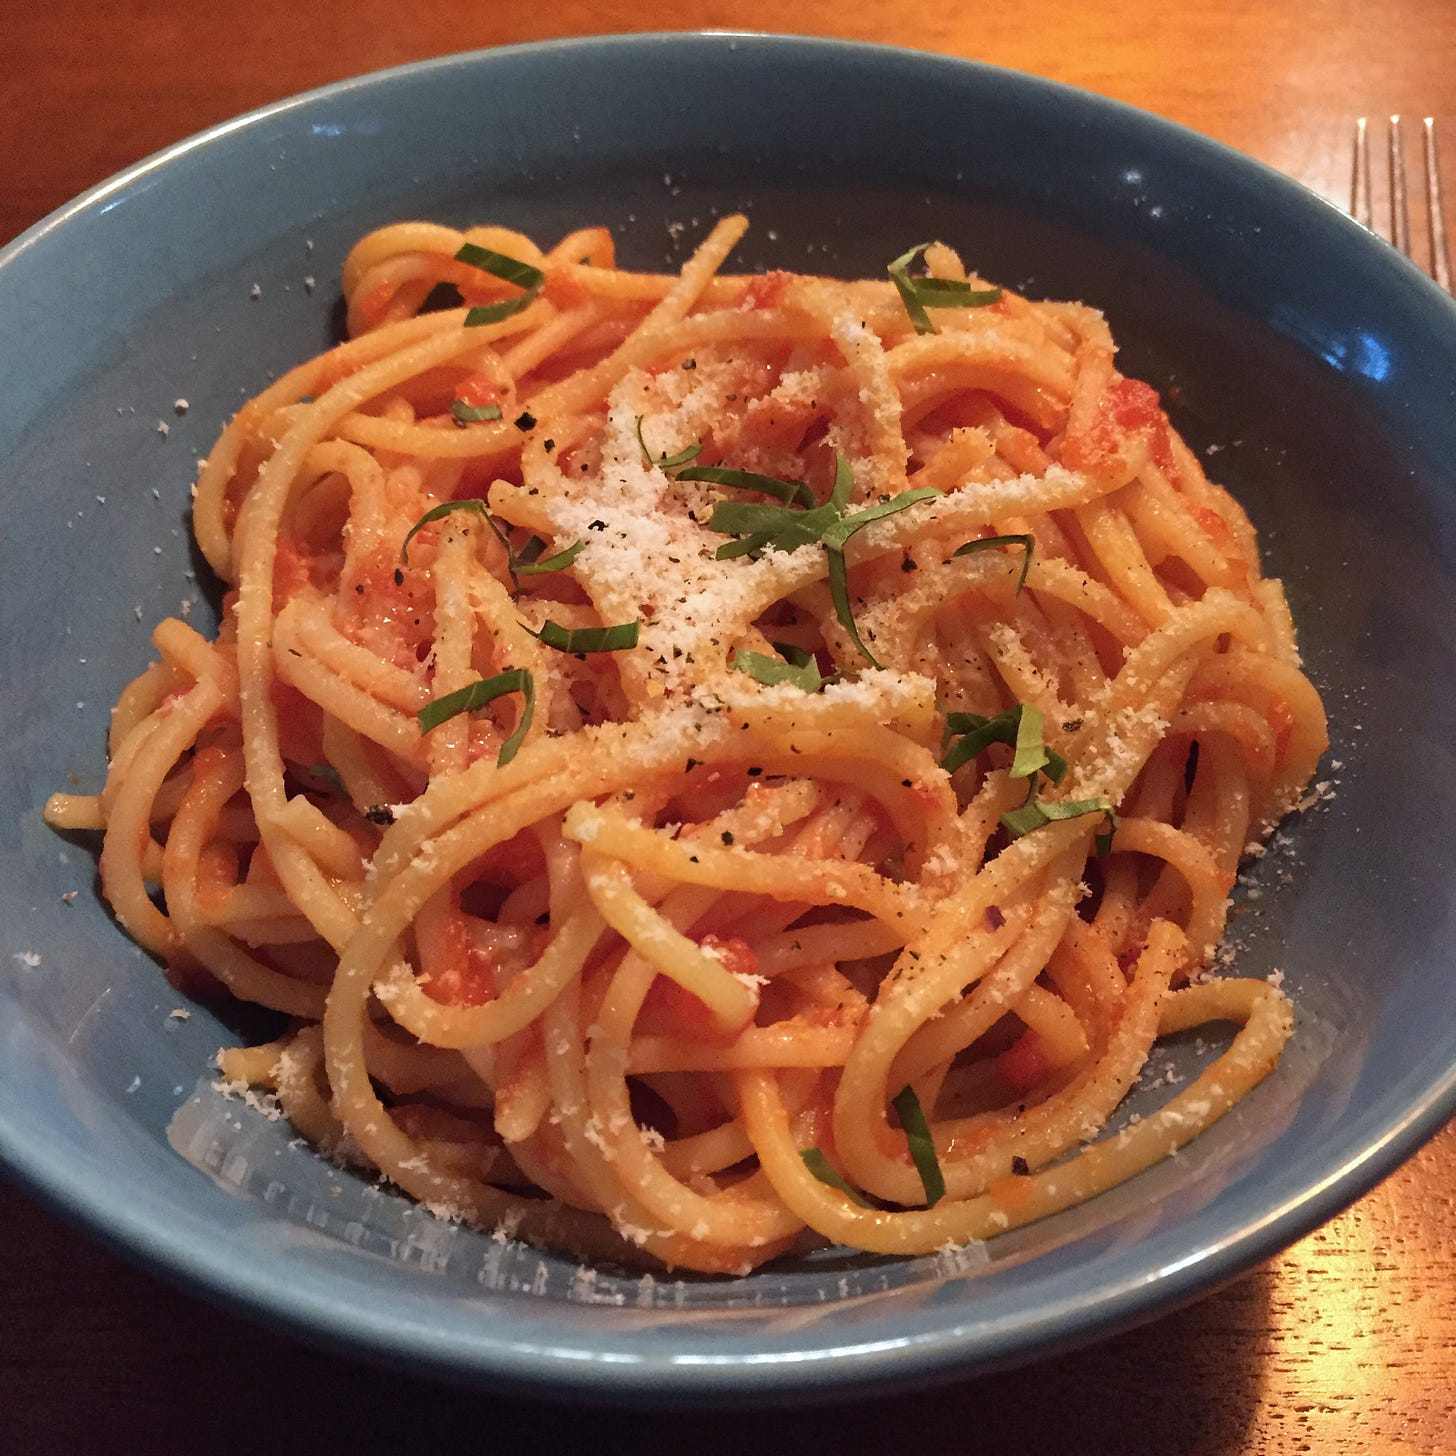 a blue bowl full of spaghetti in a light coating of tomato sauce, with a dusting of parmesan and shreds of basil.